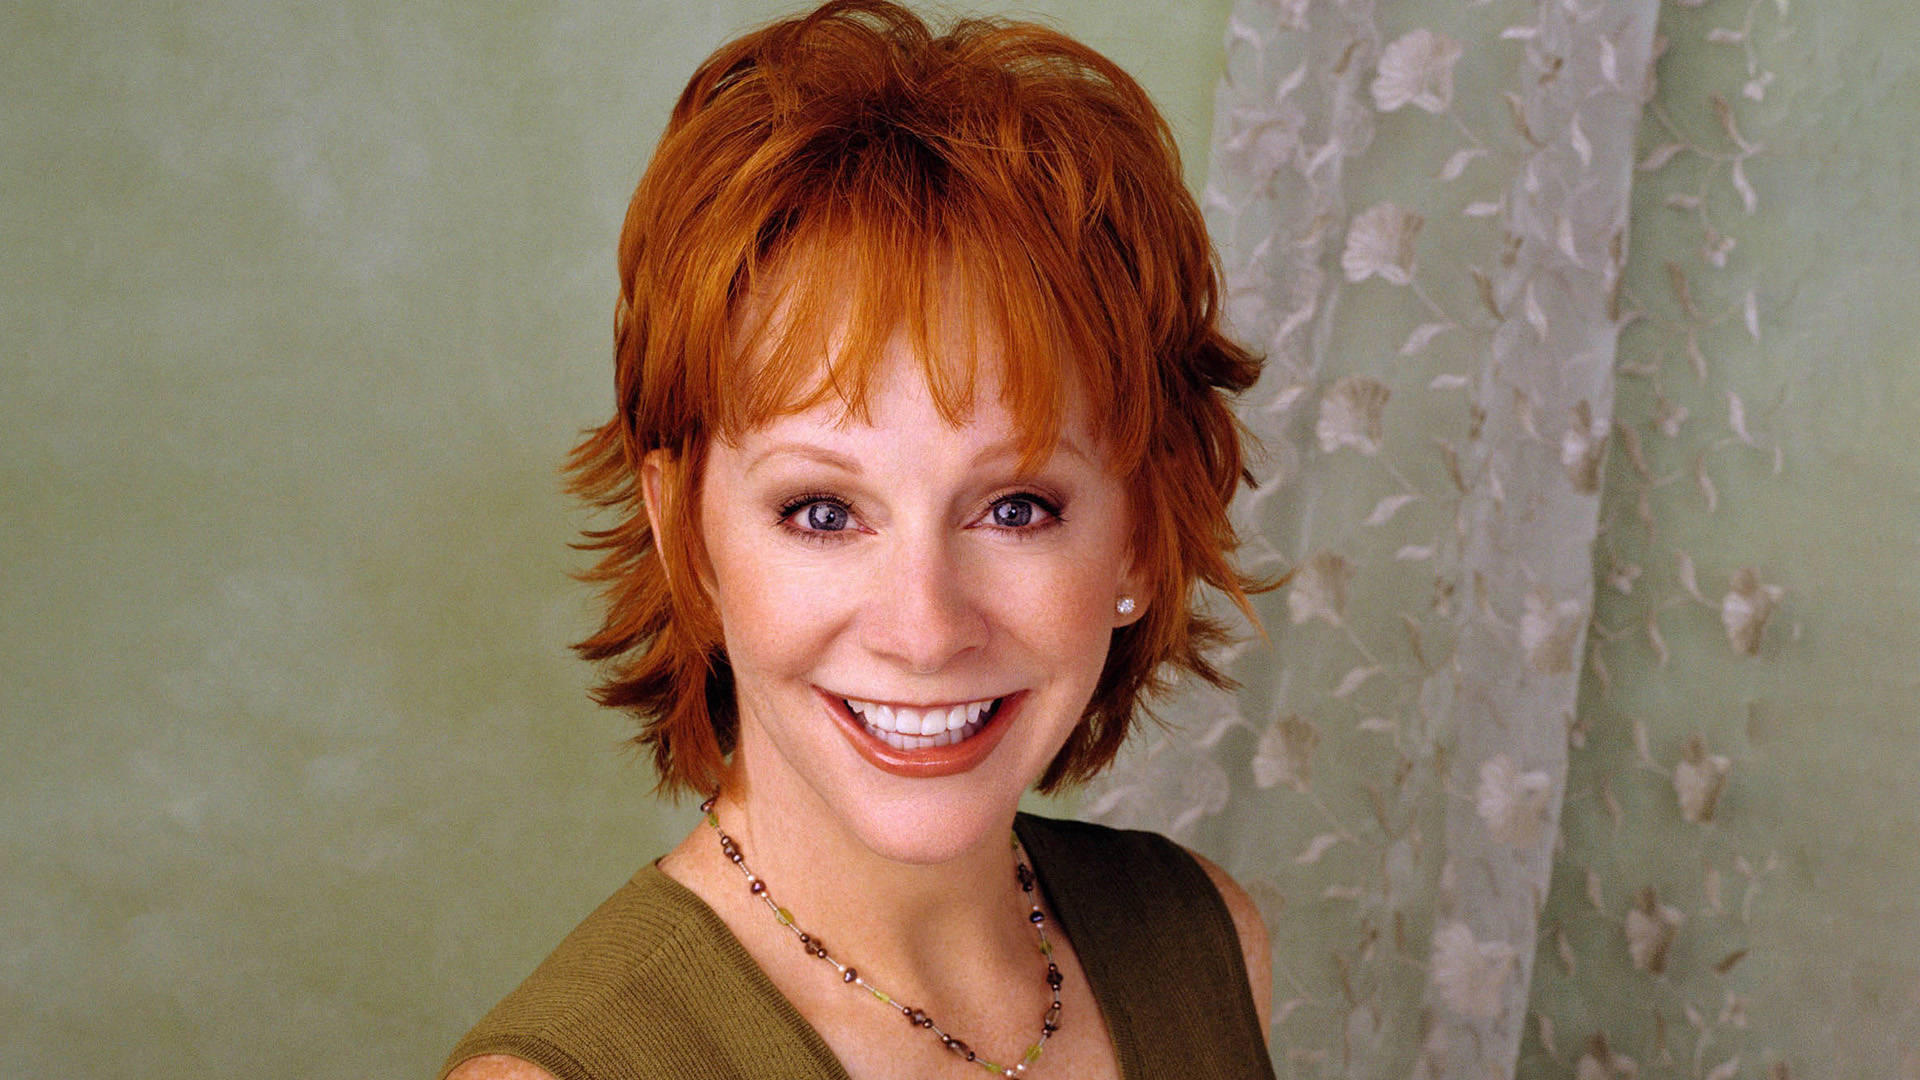 Is Reba McEntire's Iconic Sitcom Getting a Reboot? Here's What We Know So Far